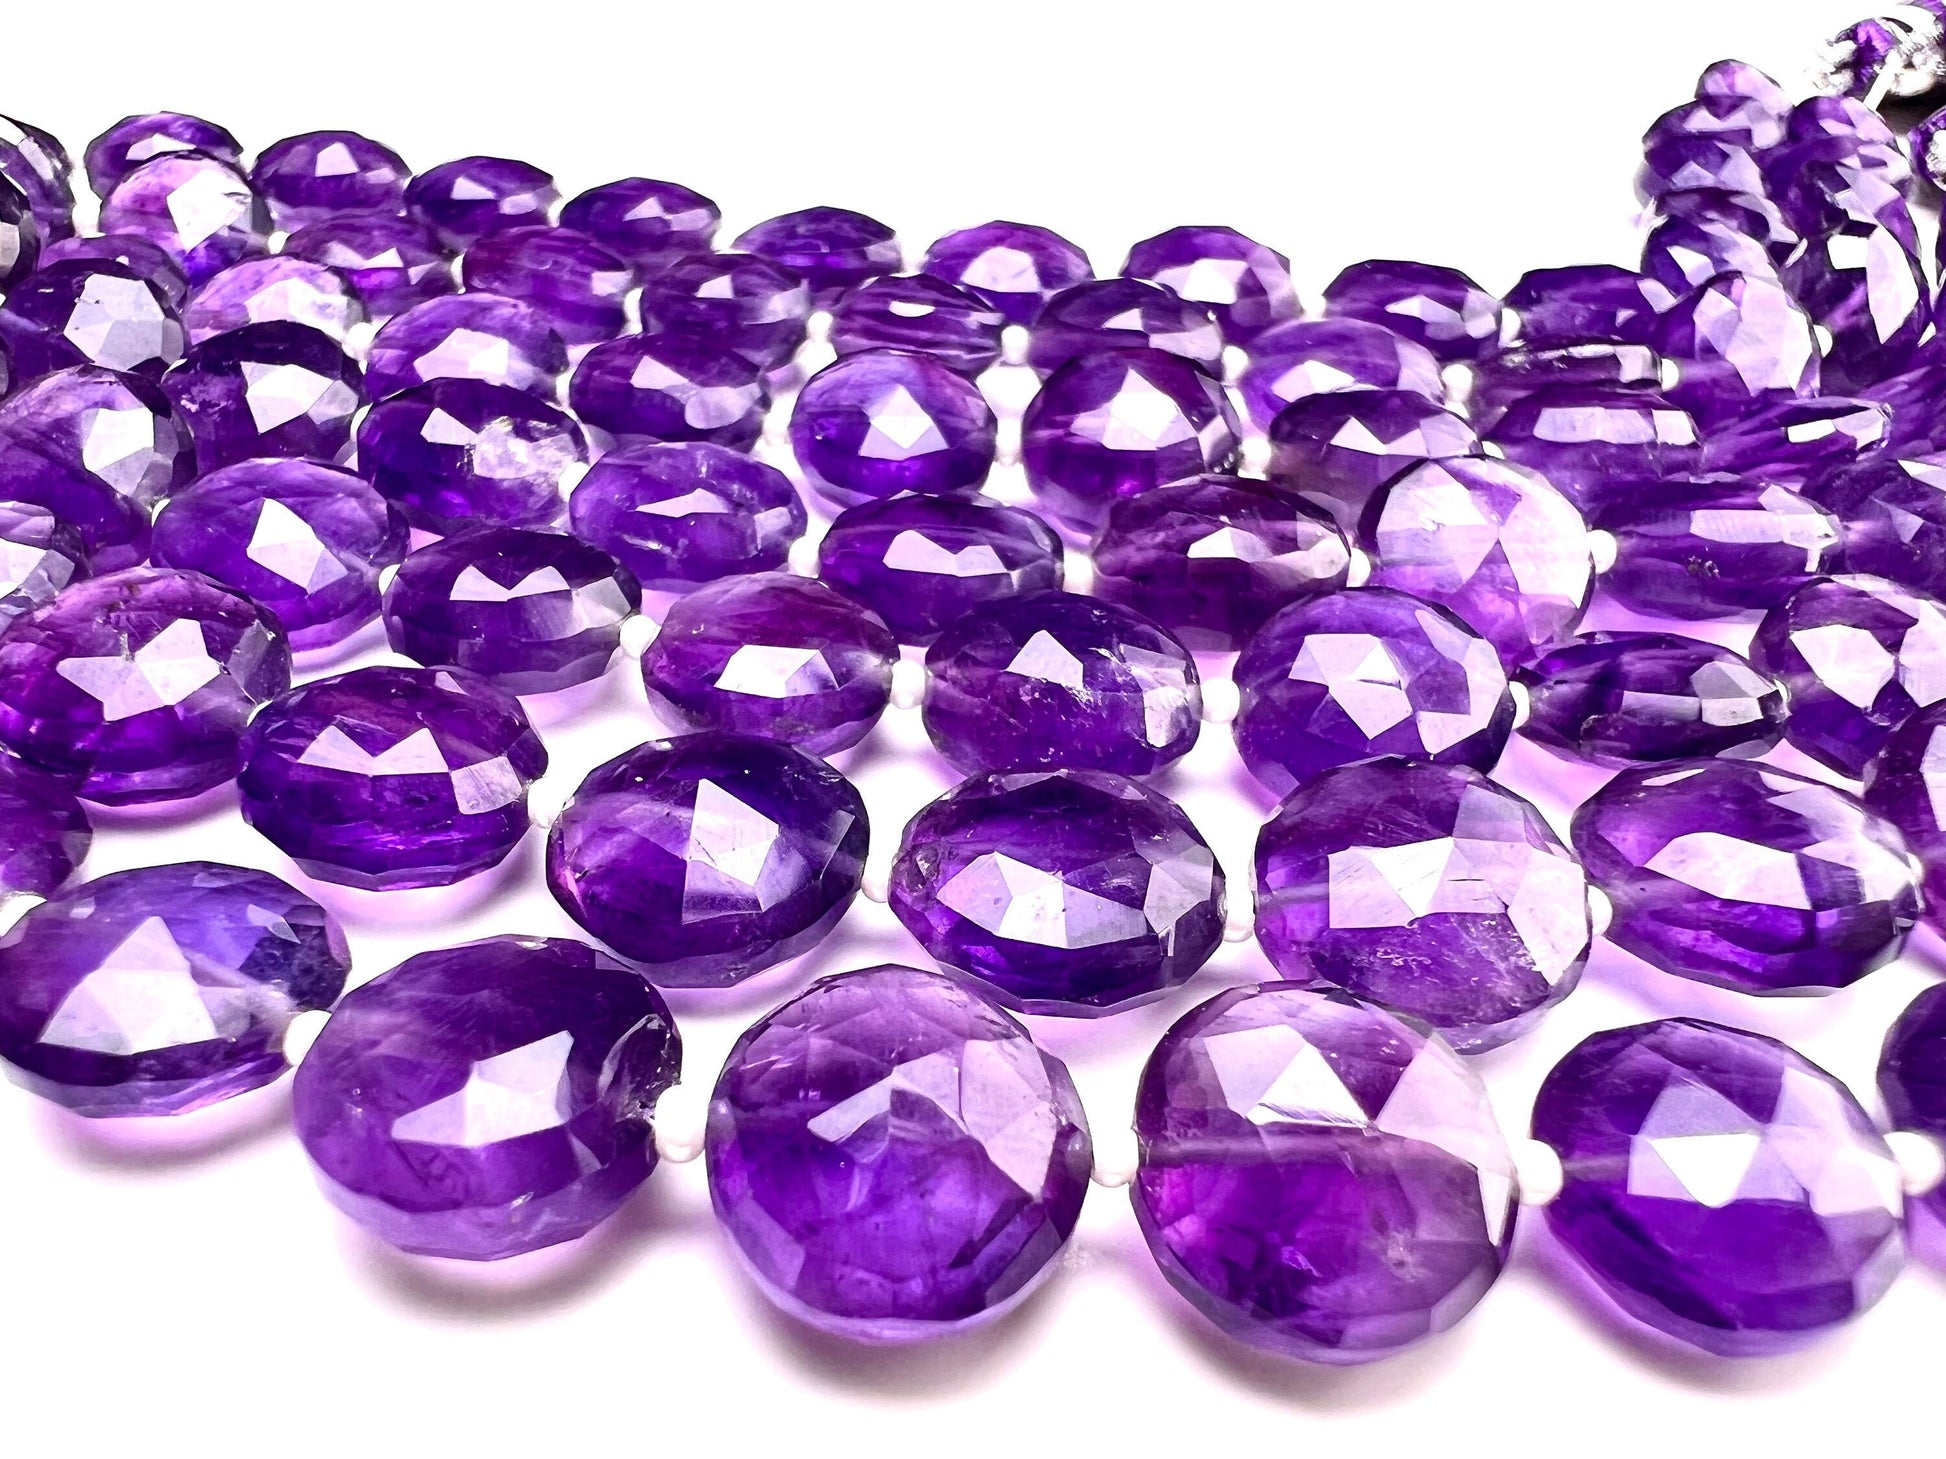 Natural Amethyst Faceted Dime shape 10.5-11.5mm.thickness 5.5-6.5mm AAA quality for Jewelry Making DIY Gemstone Beads . 7” strand 15 pcs